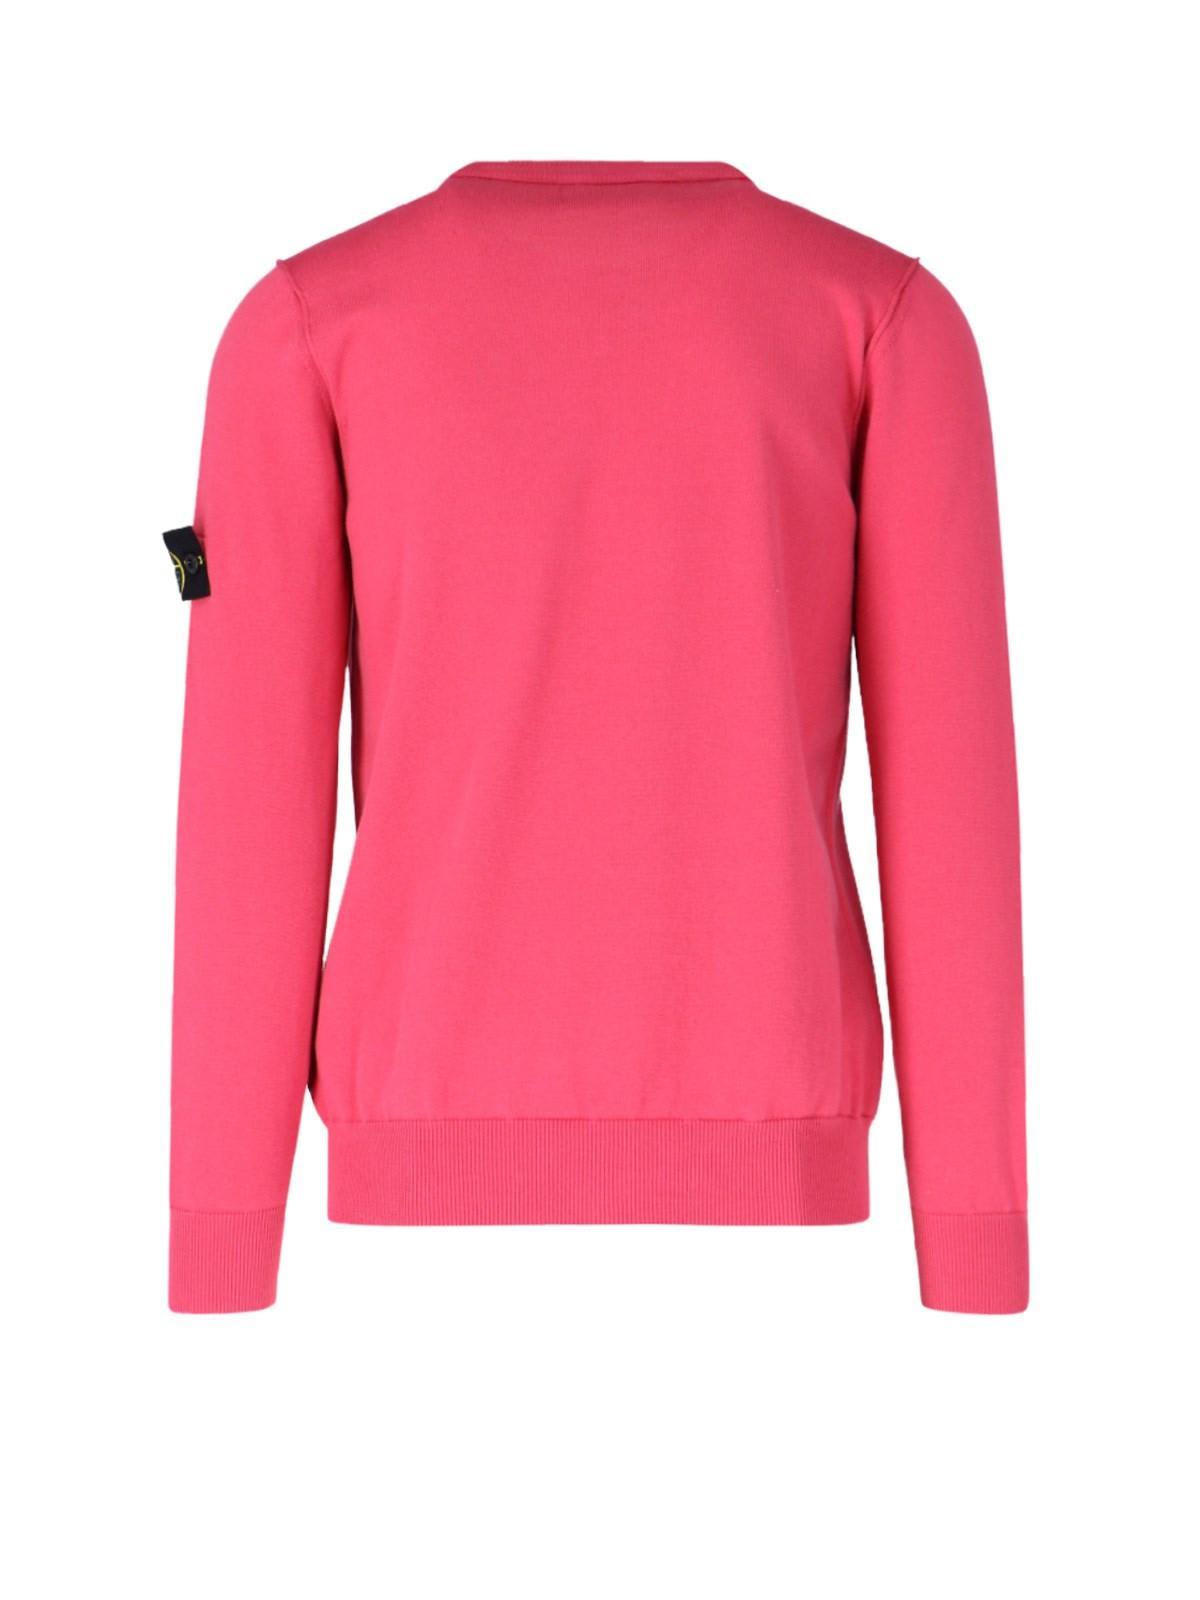 Stone Island Logo Shirt in Pink for Men | Lyst